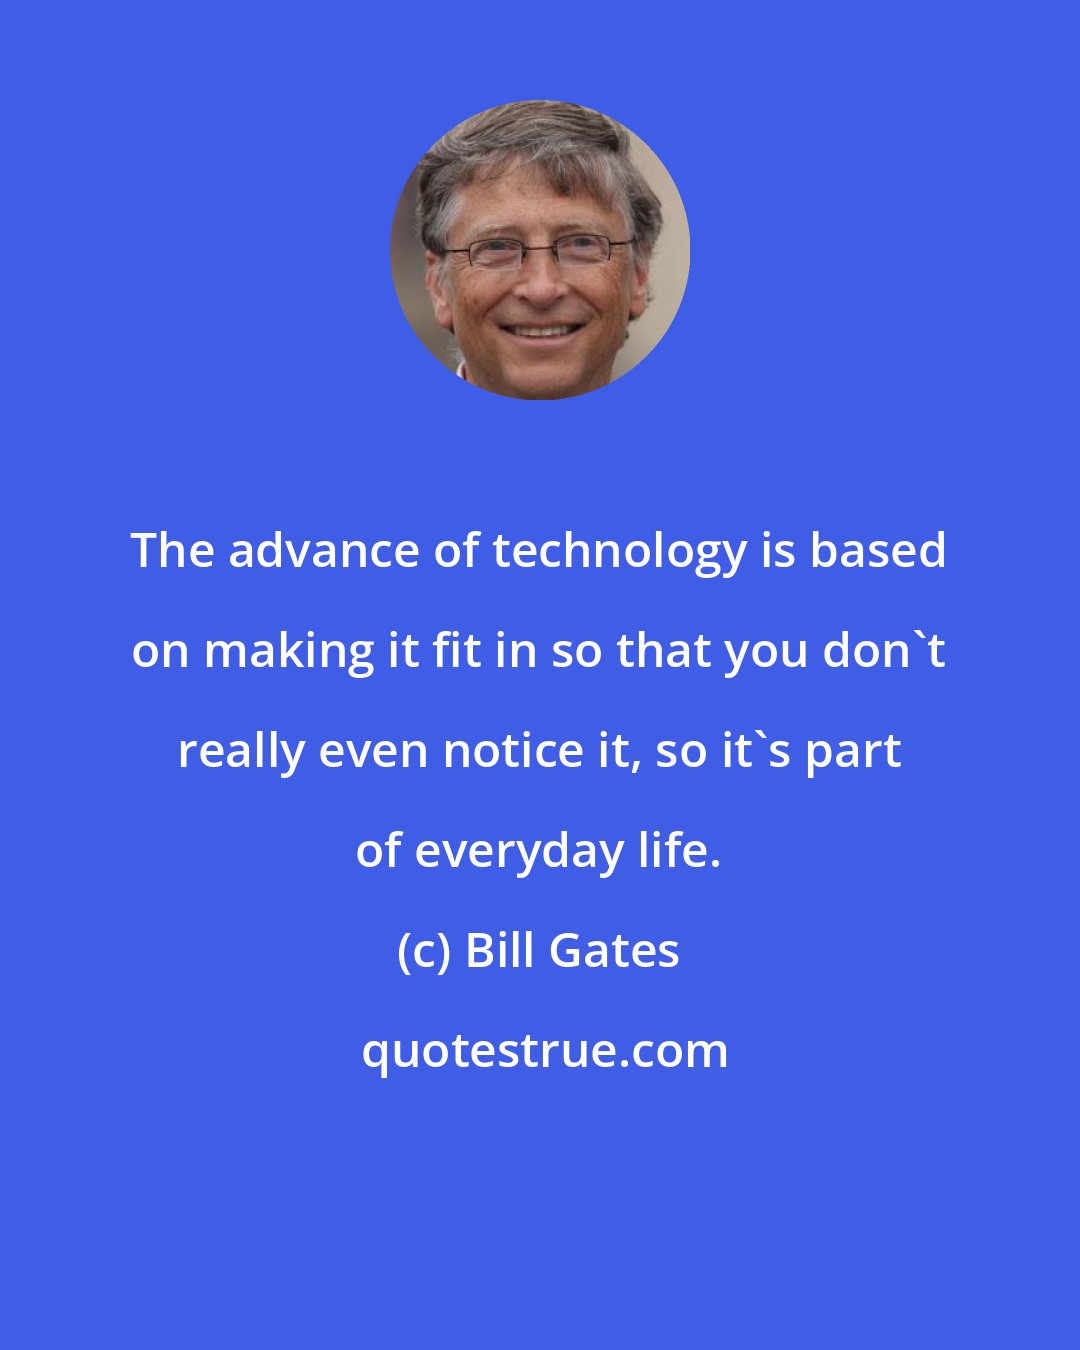 Bill Gates: The advance of technology is based on making it fit in so that you don't really even notice it, so it's part of everyday life.